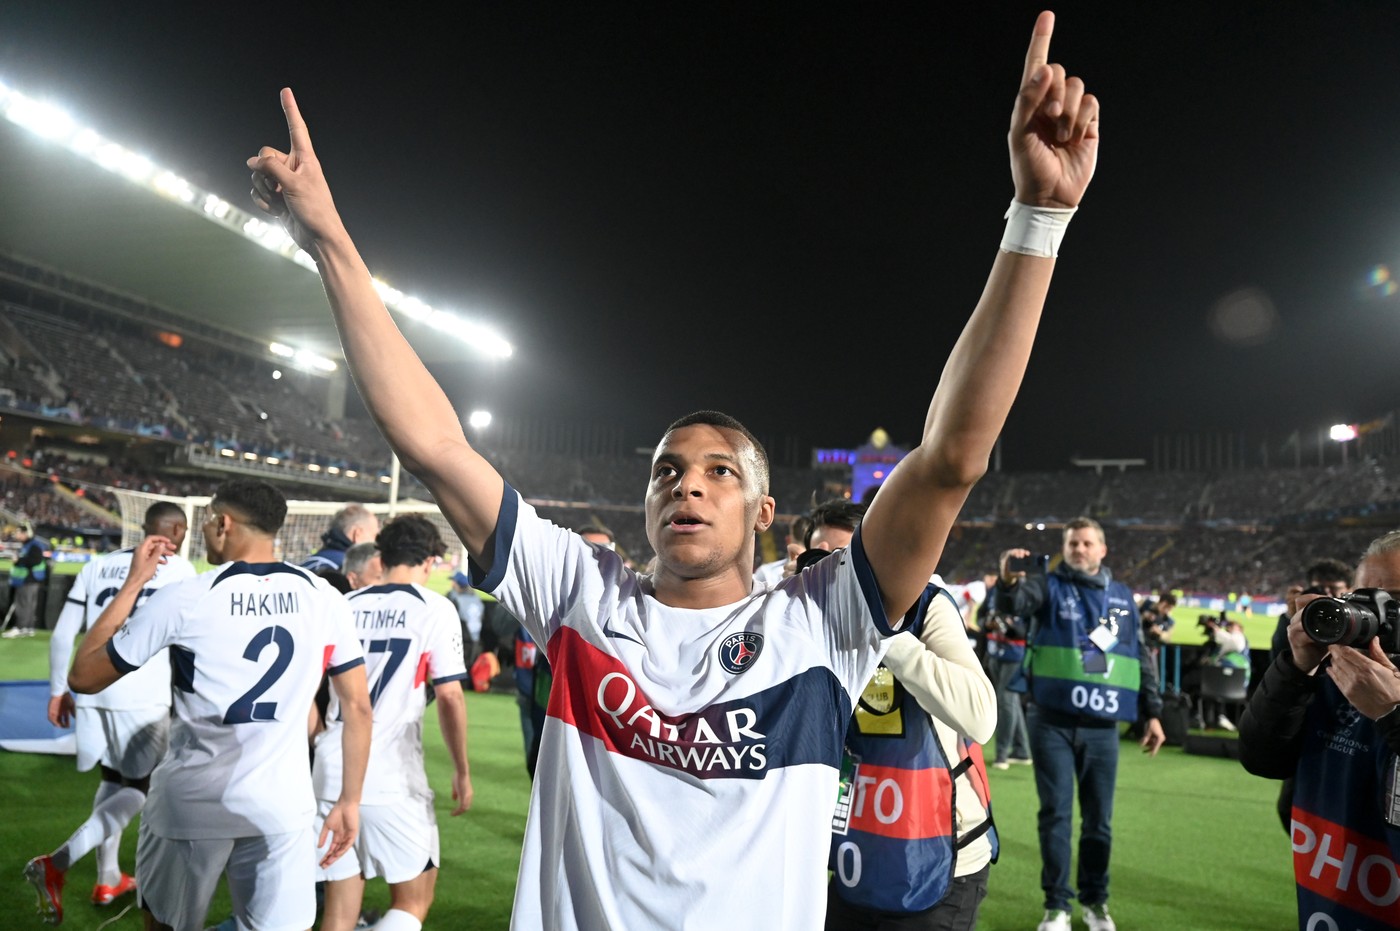 07 Kylian MBAPPE (psg) during the UEFA Champions League Quarter-finals match between Barcelona and Paris at Estadi Olimpic Lluis Companys on April 16, 2024 in Barcelona, Spain.,Image: 865407400, License: Rights-managed, Restrictions: *** World Rights Except Belgium and France *** BELOUT FRAOUT, Model Release: no, Credit line: Icon Sport / ddp USA / Profimedia